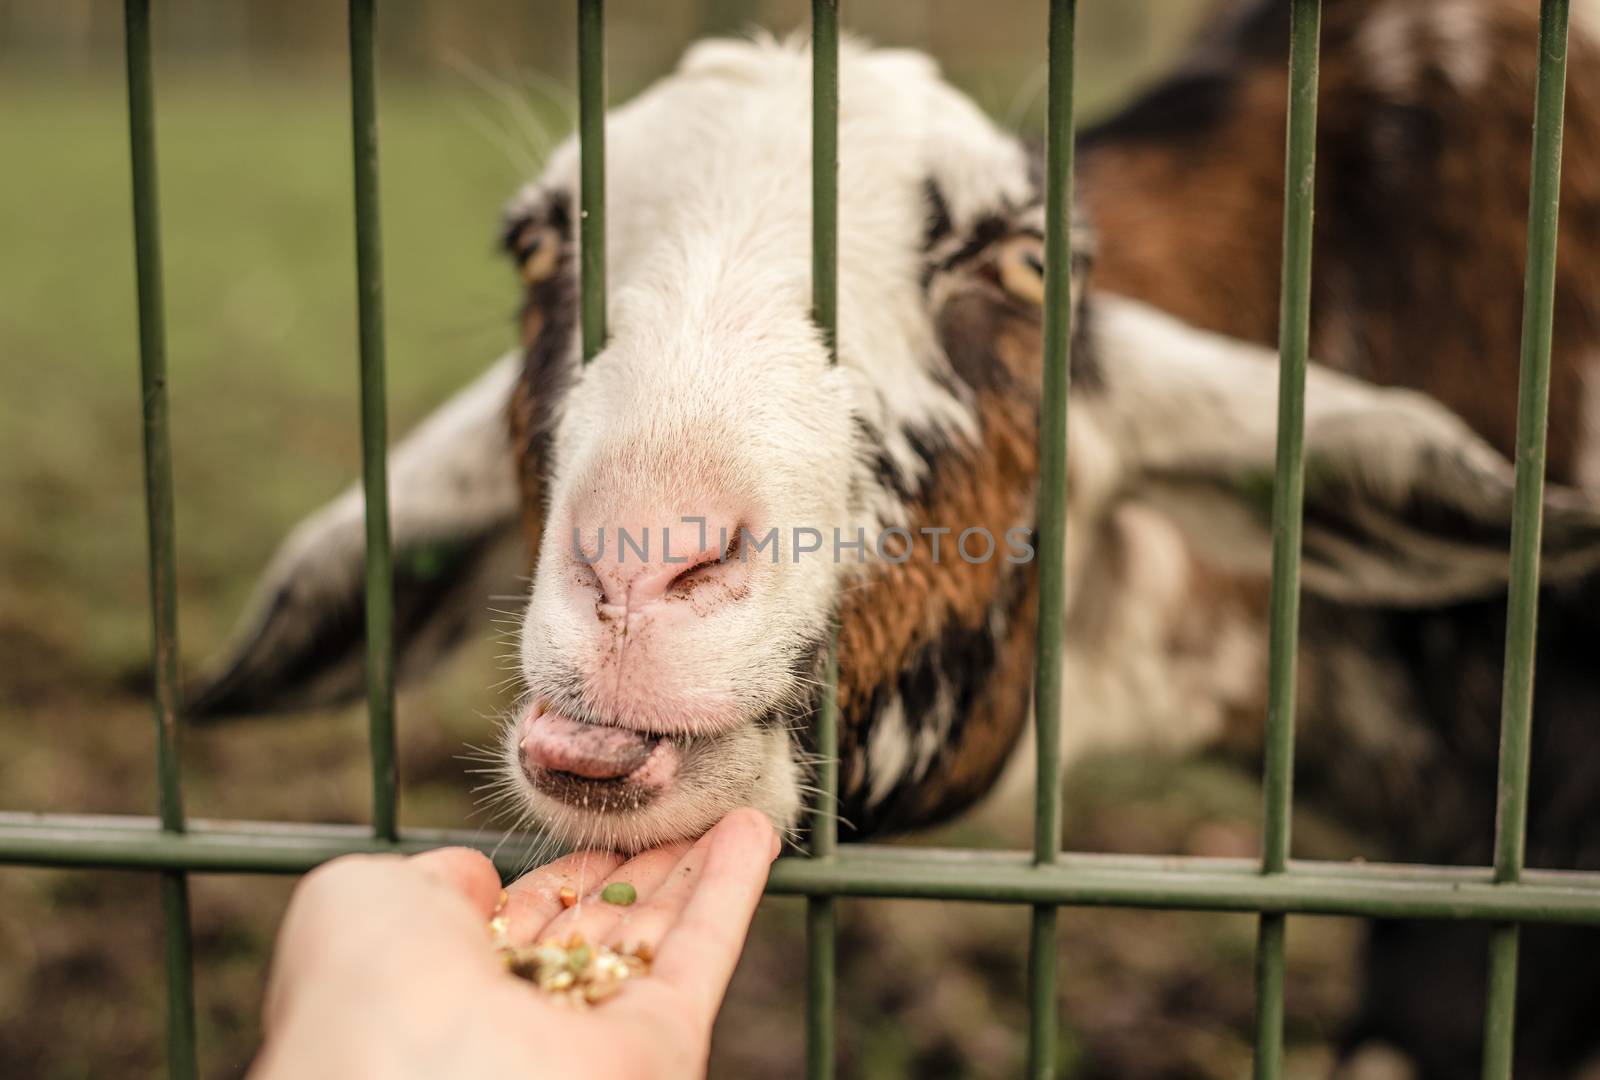 A goat licking food out of a persons hand by Pendleton